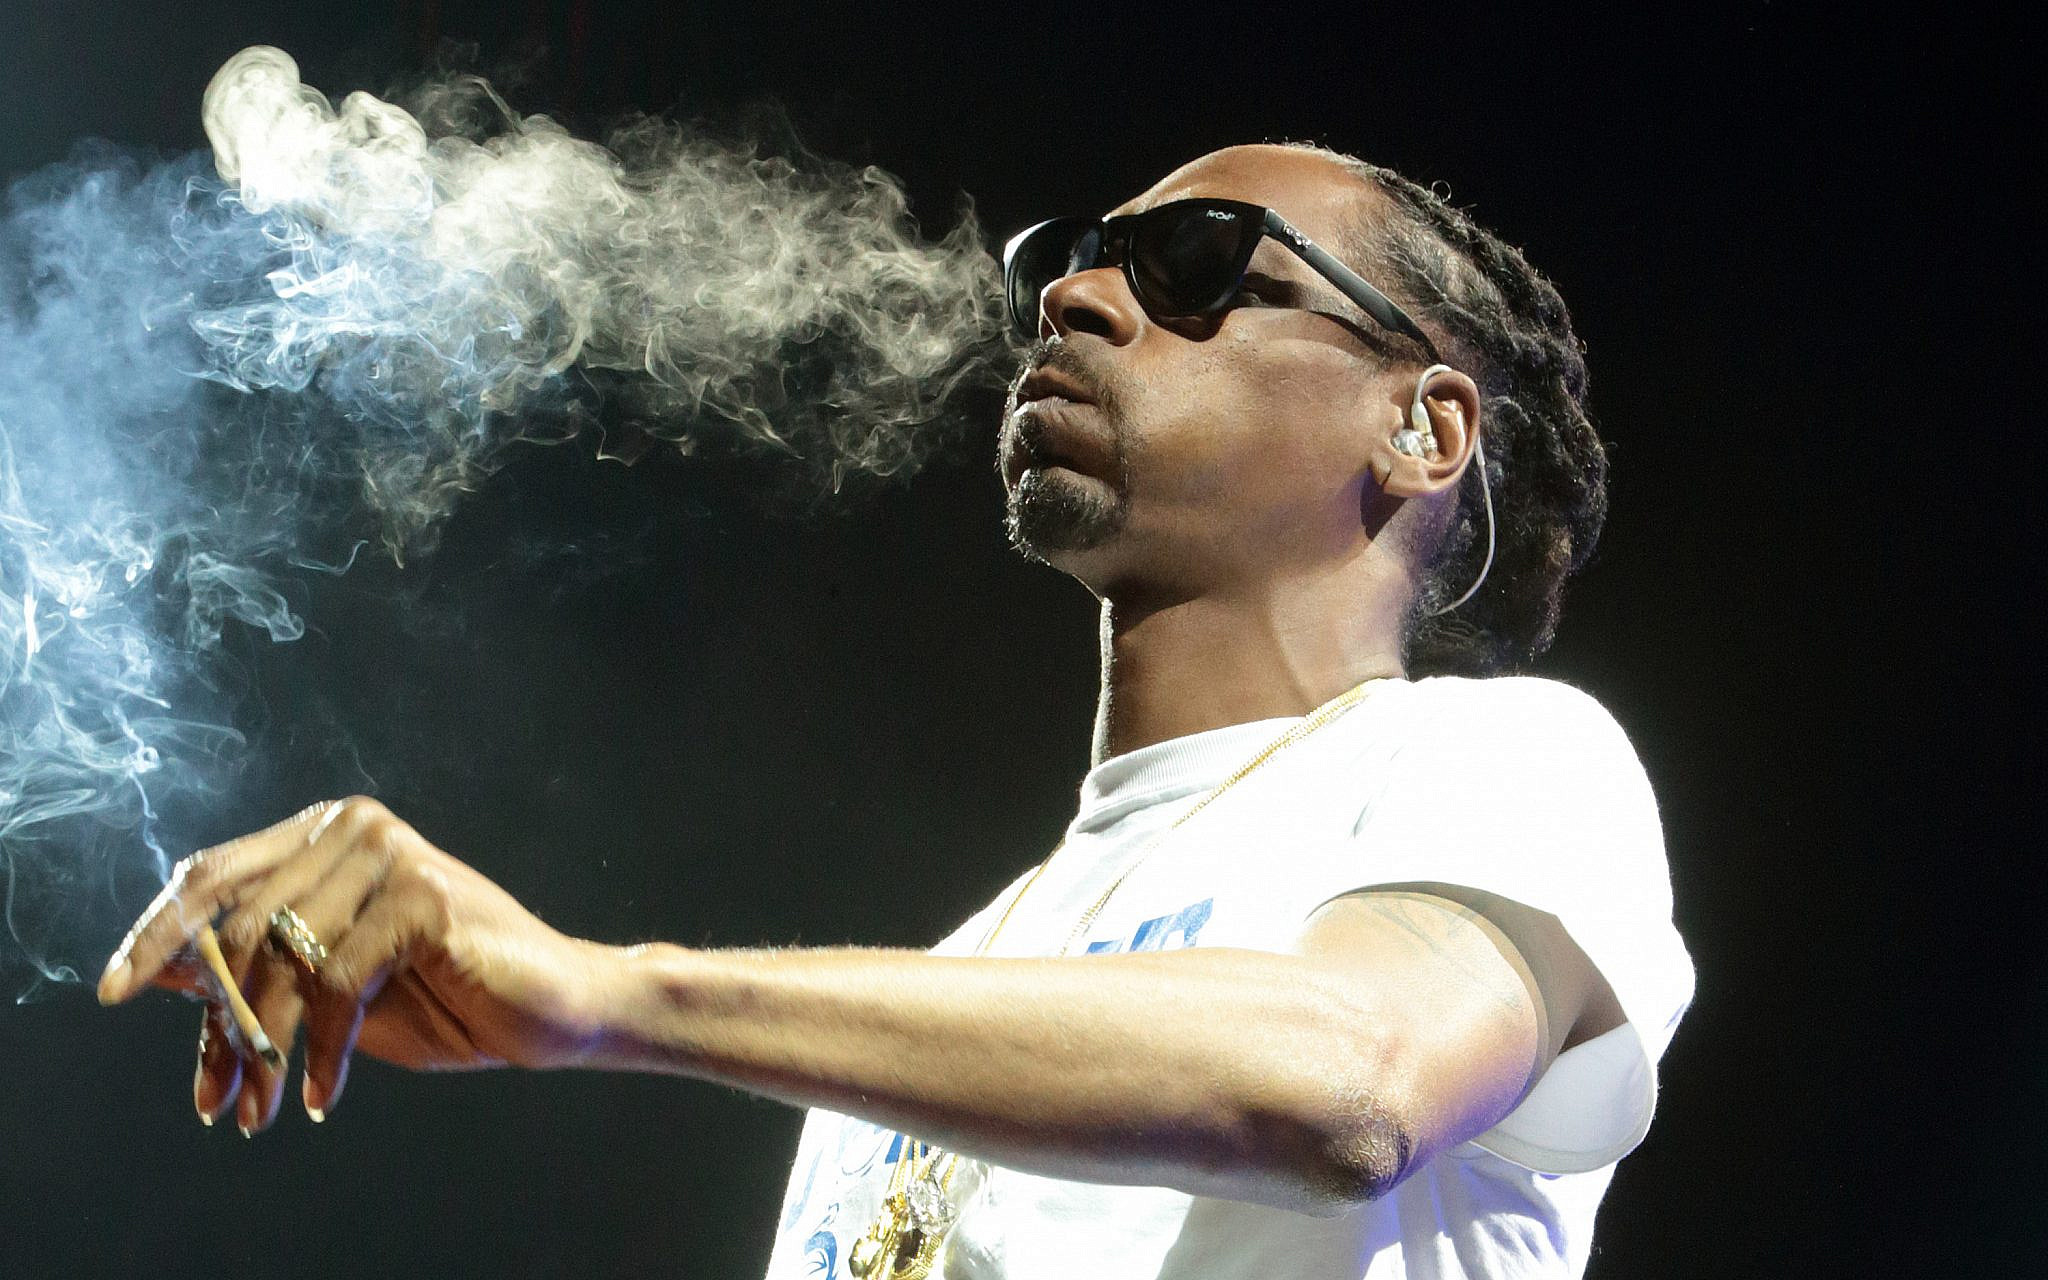 There Was No Paper, So I Used The First Page' - Snoop Dogg Confesses Using Bible Papers To Rolled Up 'Wee'